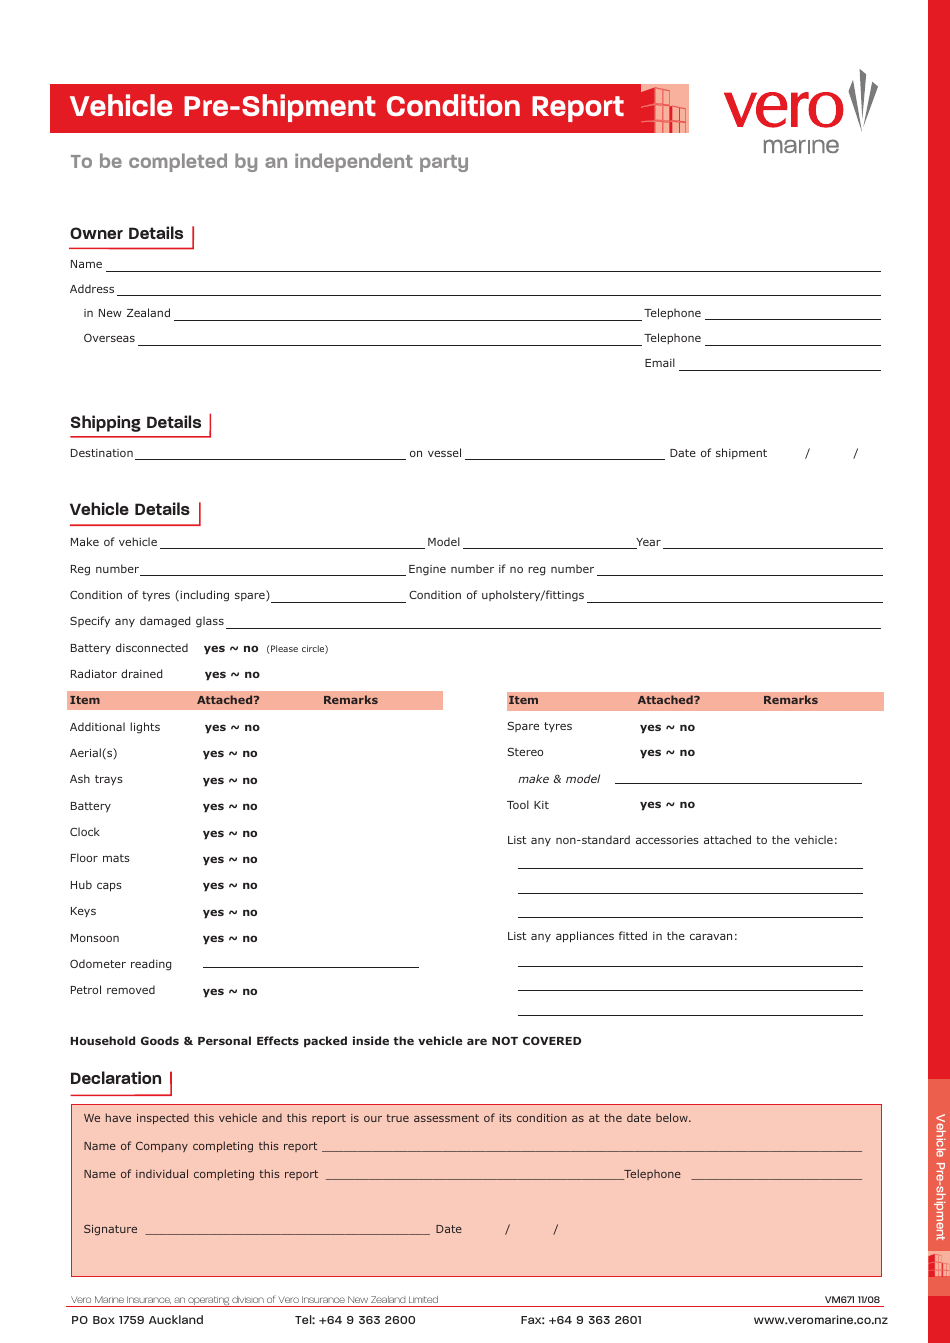 Vehicle Pre-shipment Condition Report Template - Veromarine, Page 1